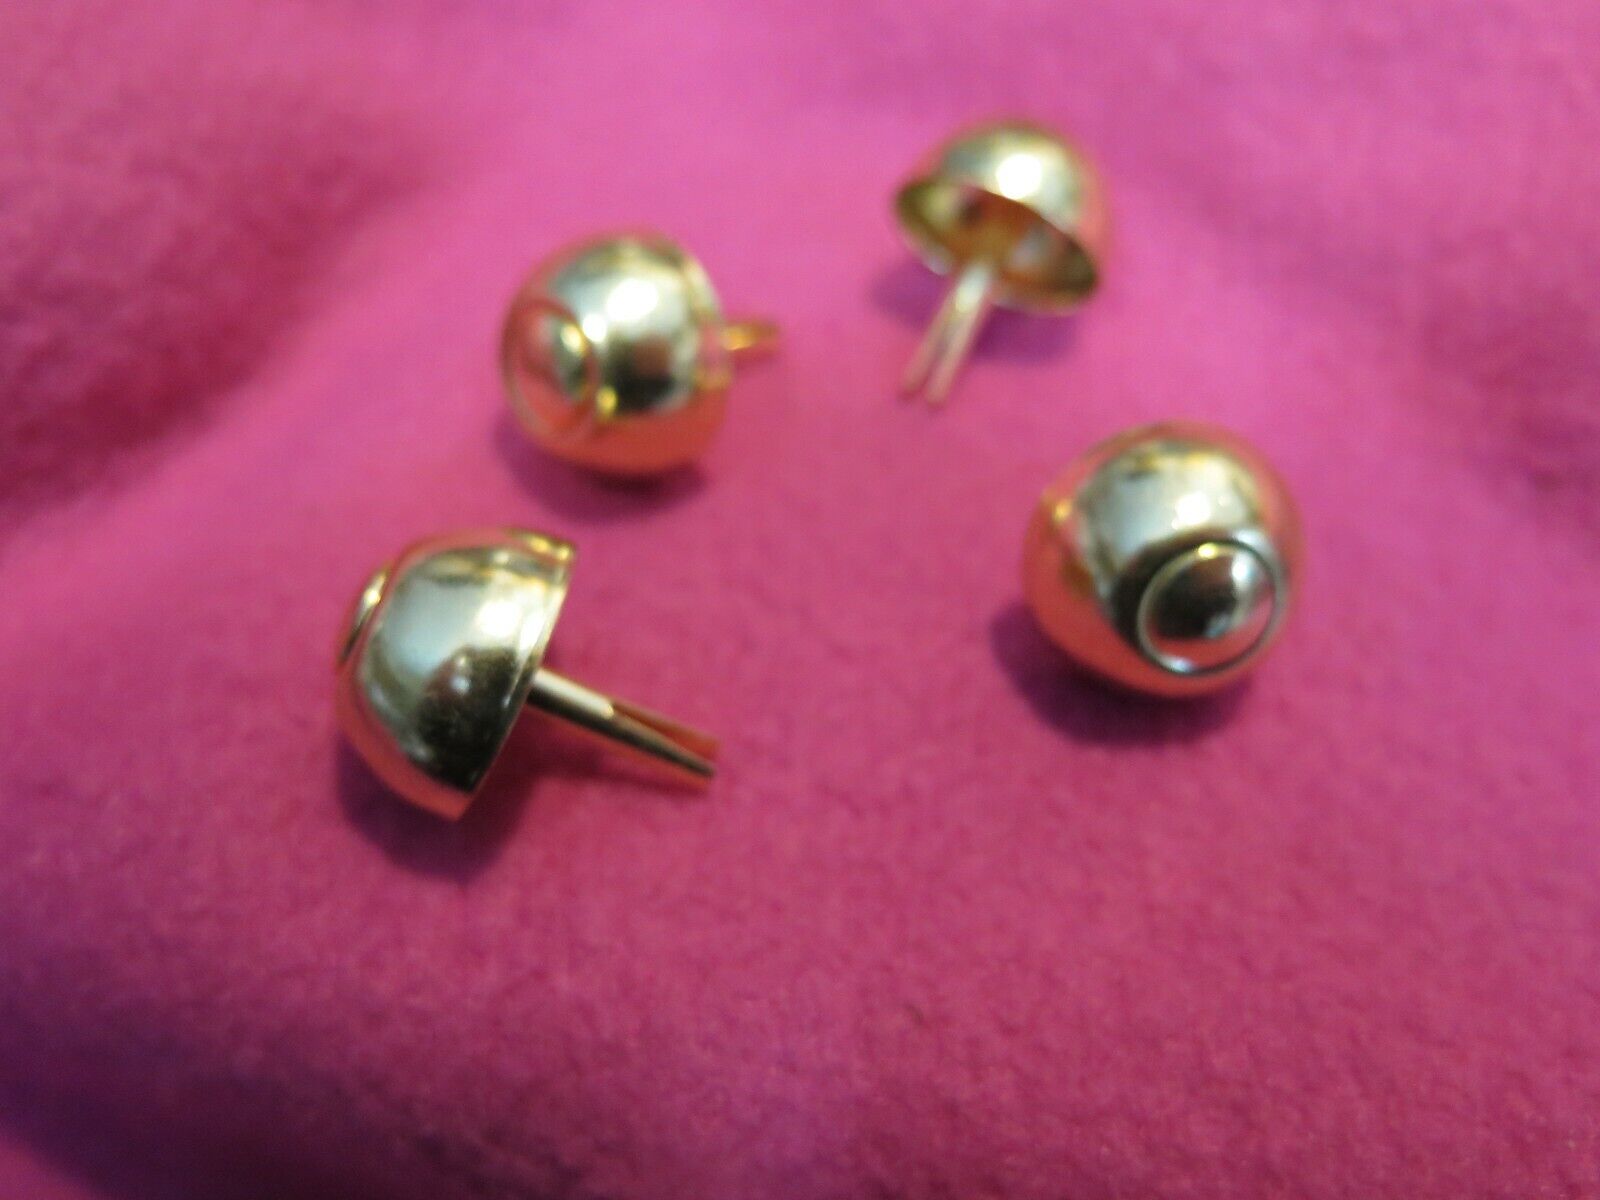 Gibson-TKL ball feet case studs for vintage guitar case luthier Guild project